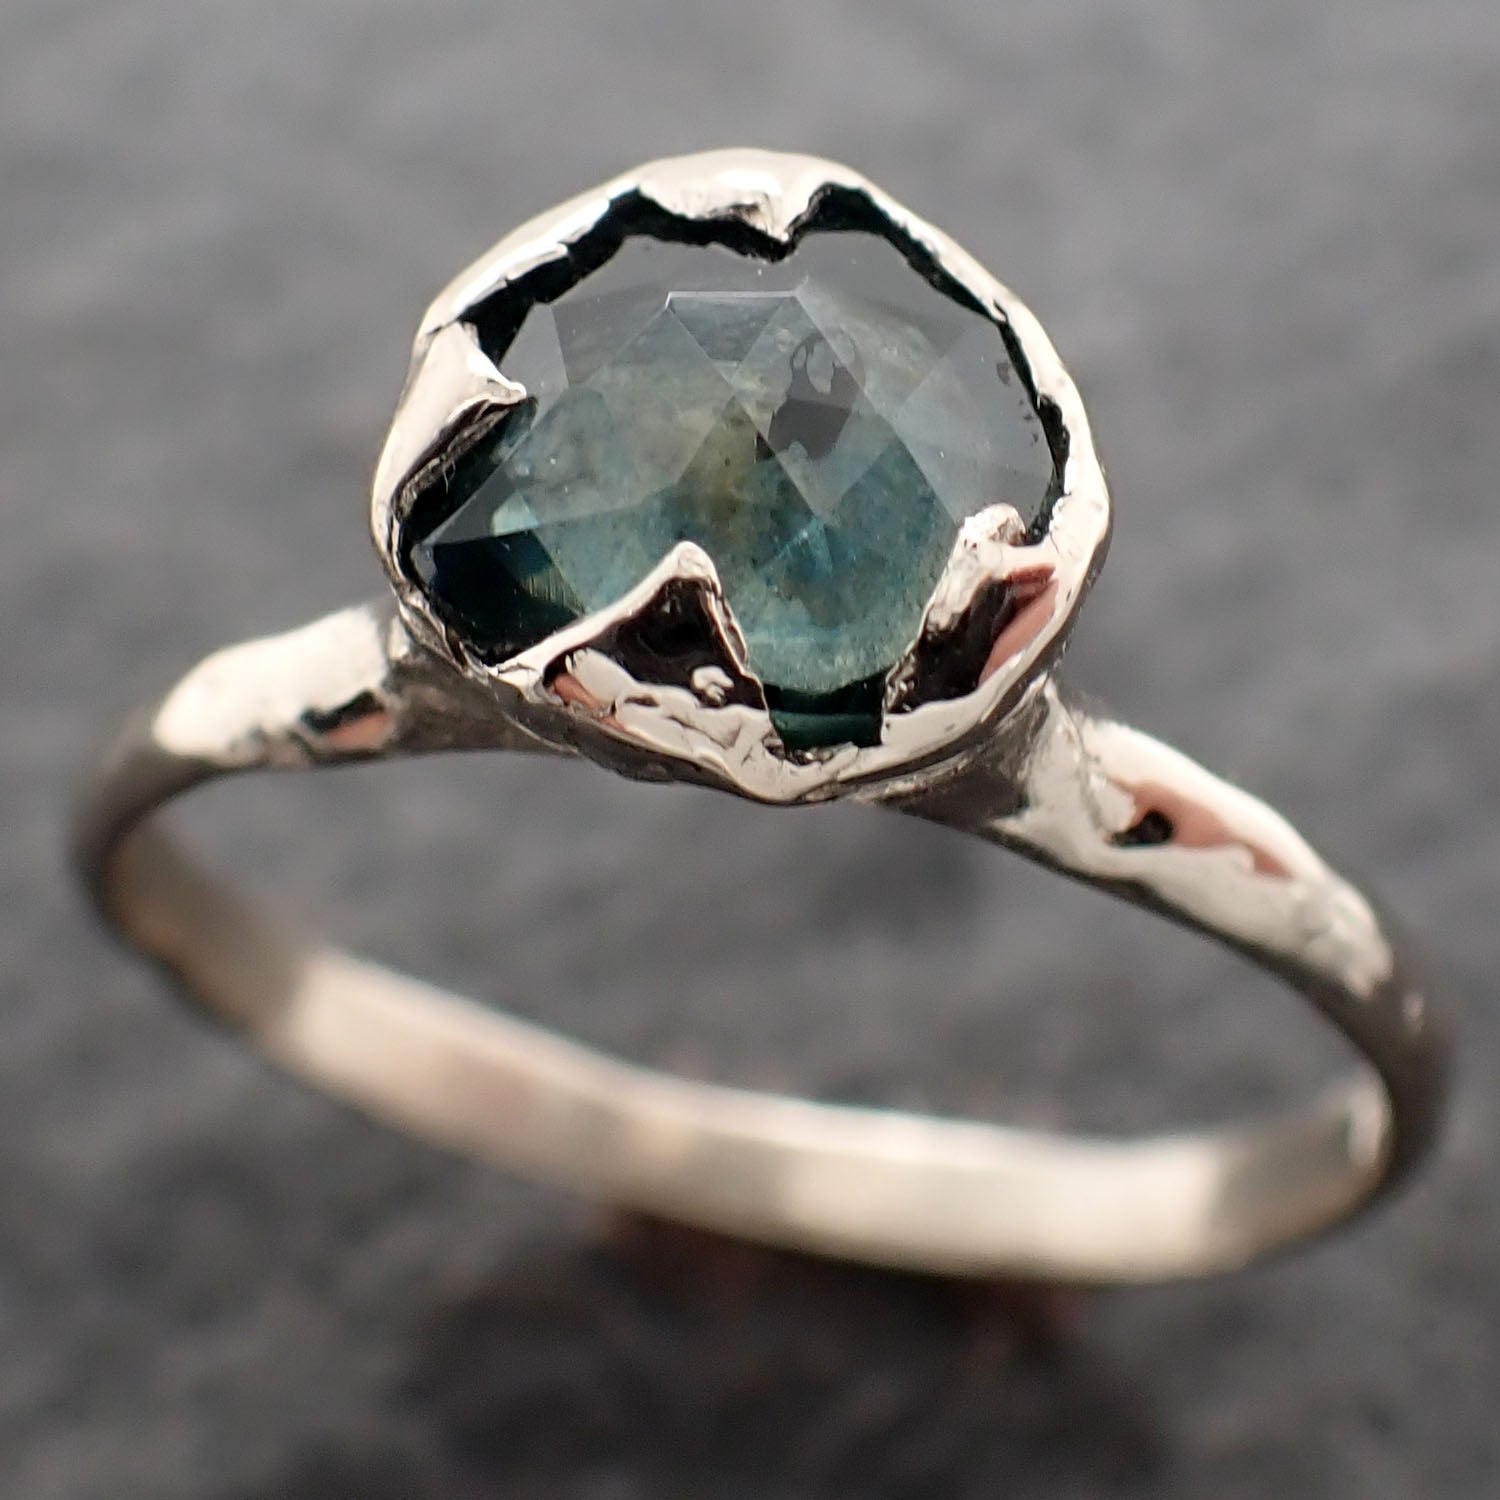 fancy cut montana blue green sapphire 14k white gold solitaire ring gold gemstone engagement ring 2620 Alternative Engagement